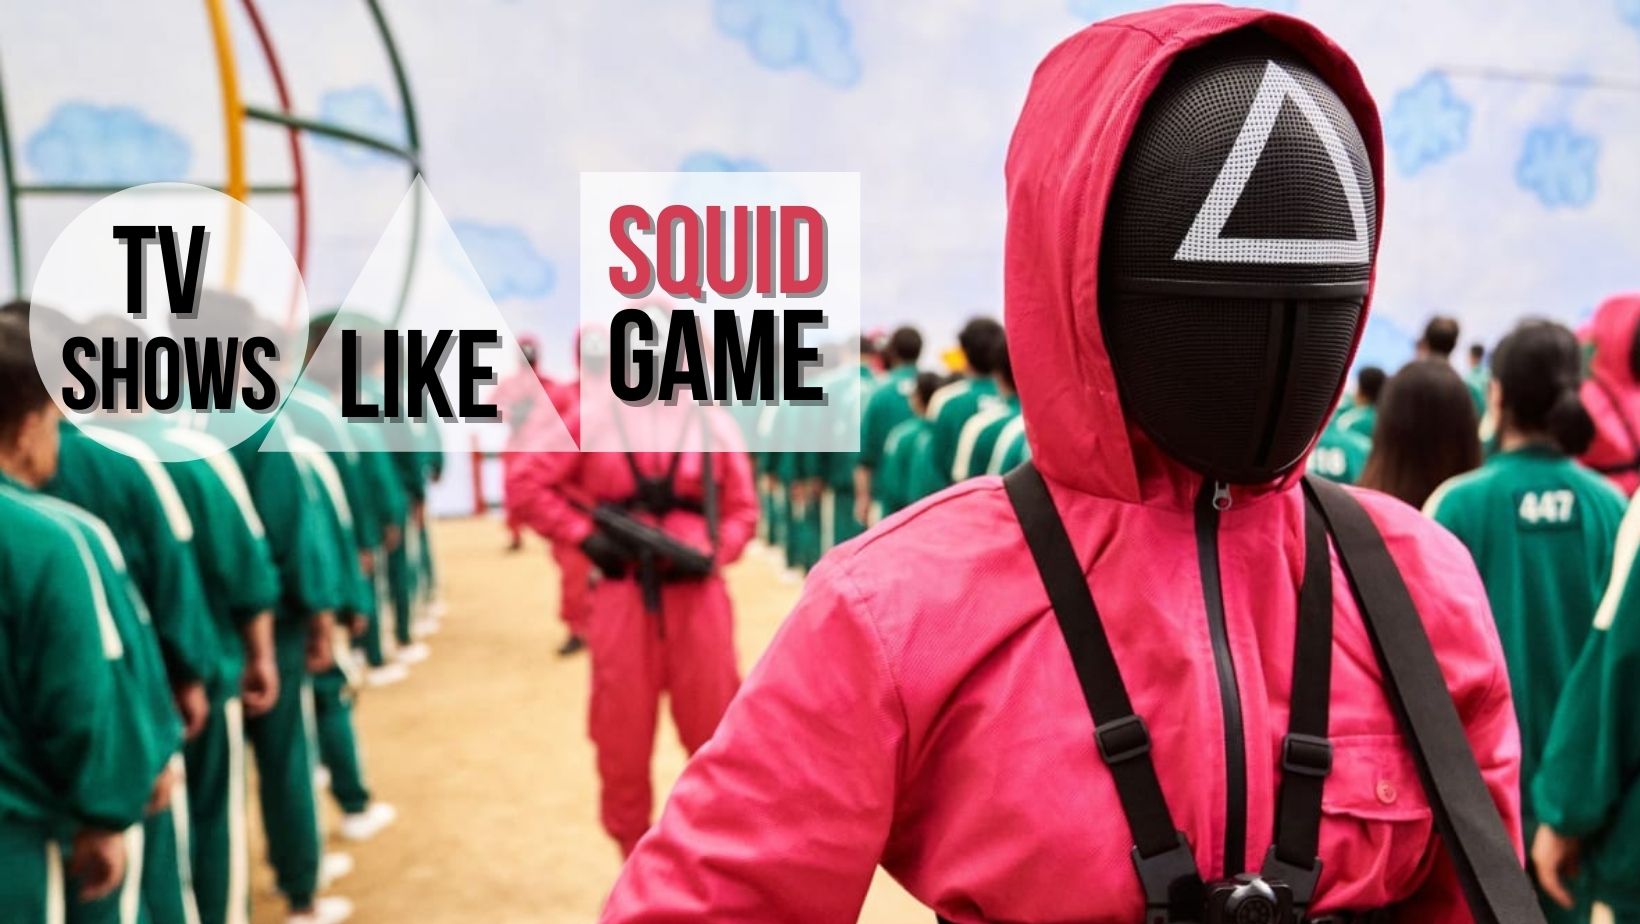 15 TV Shows Like Squid Game Contests Prizes and Death